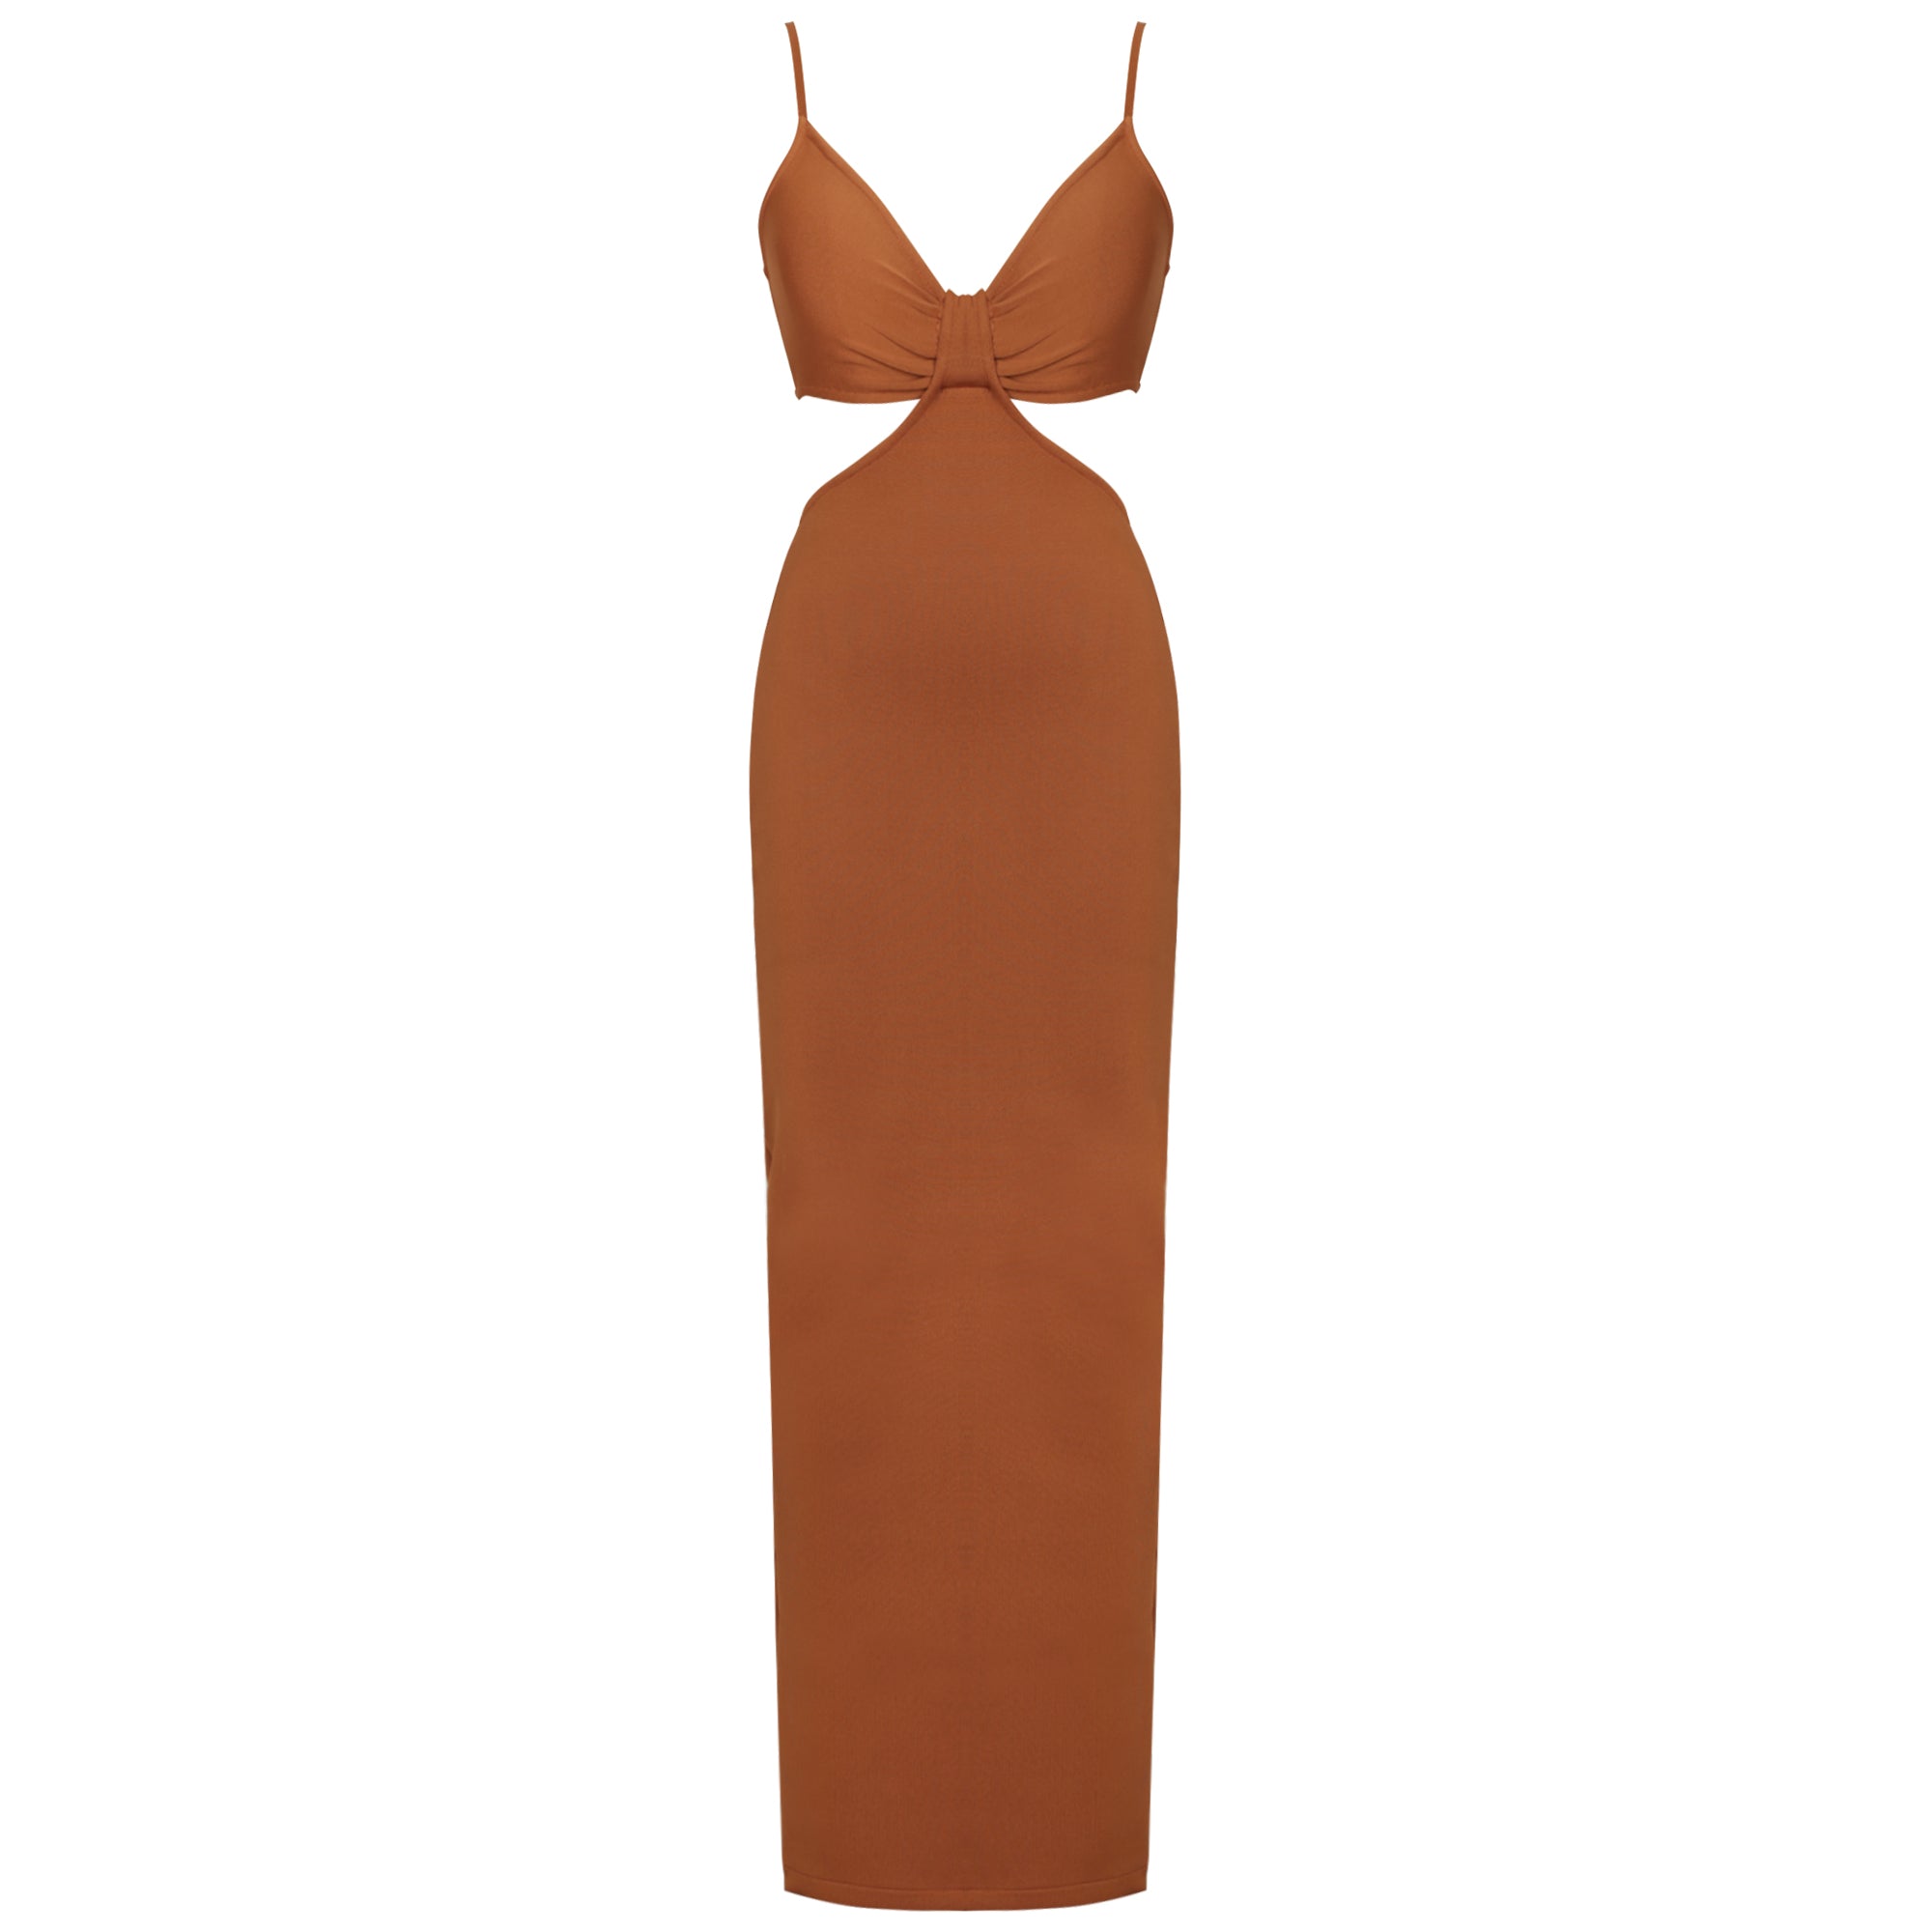 Strappy Exposed Waist Bandage Dress PP19427